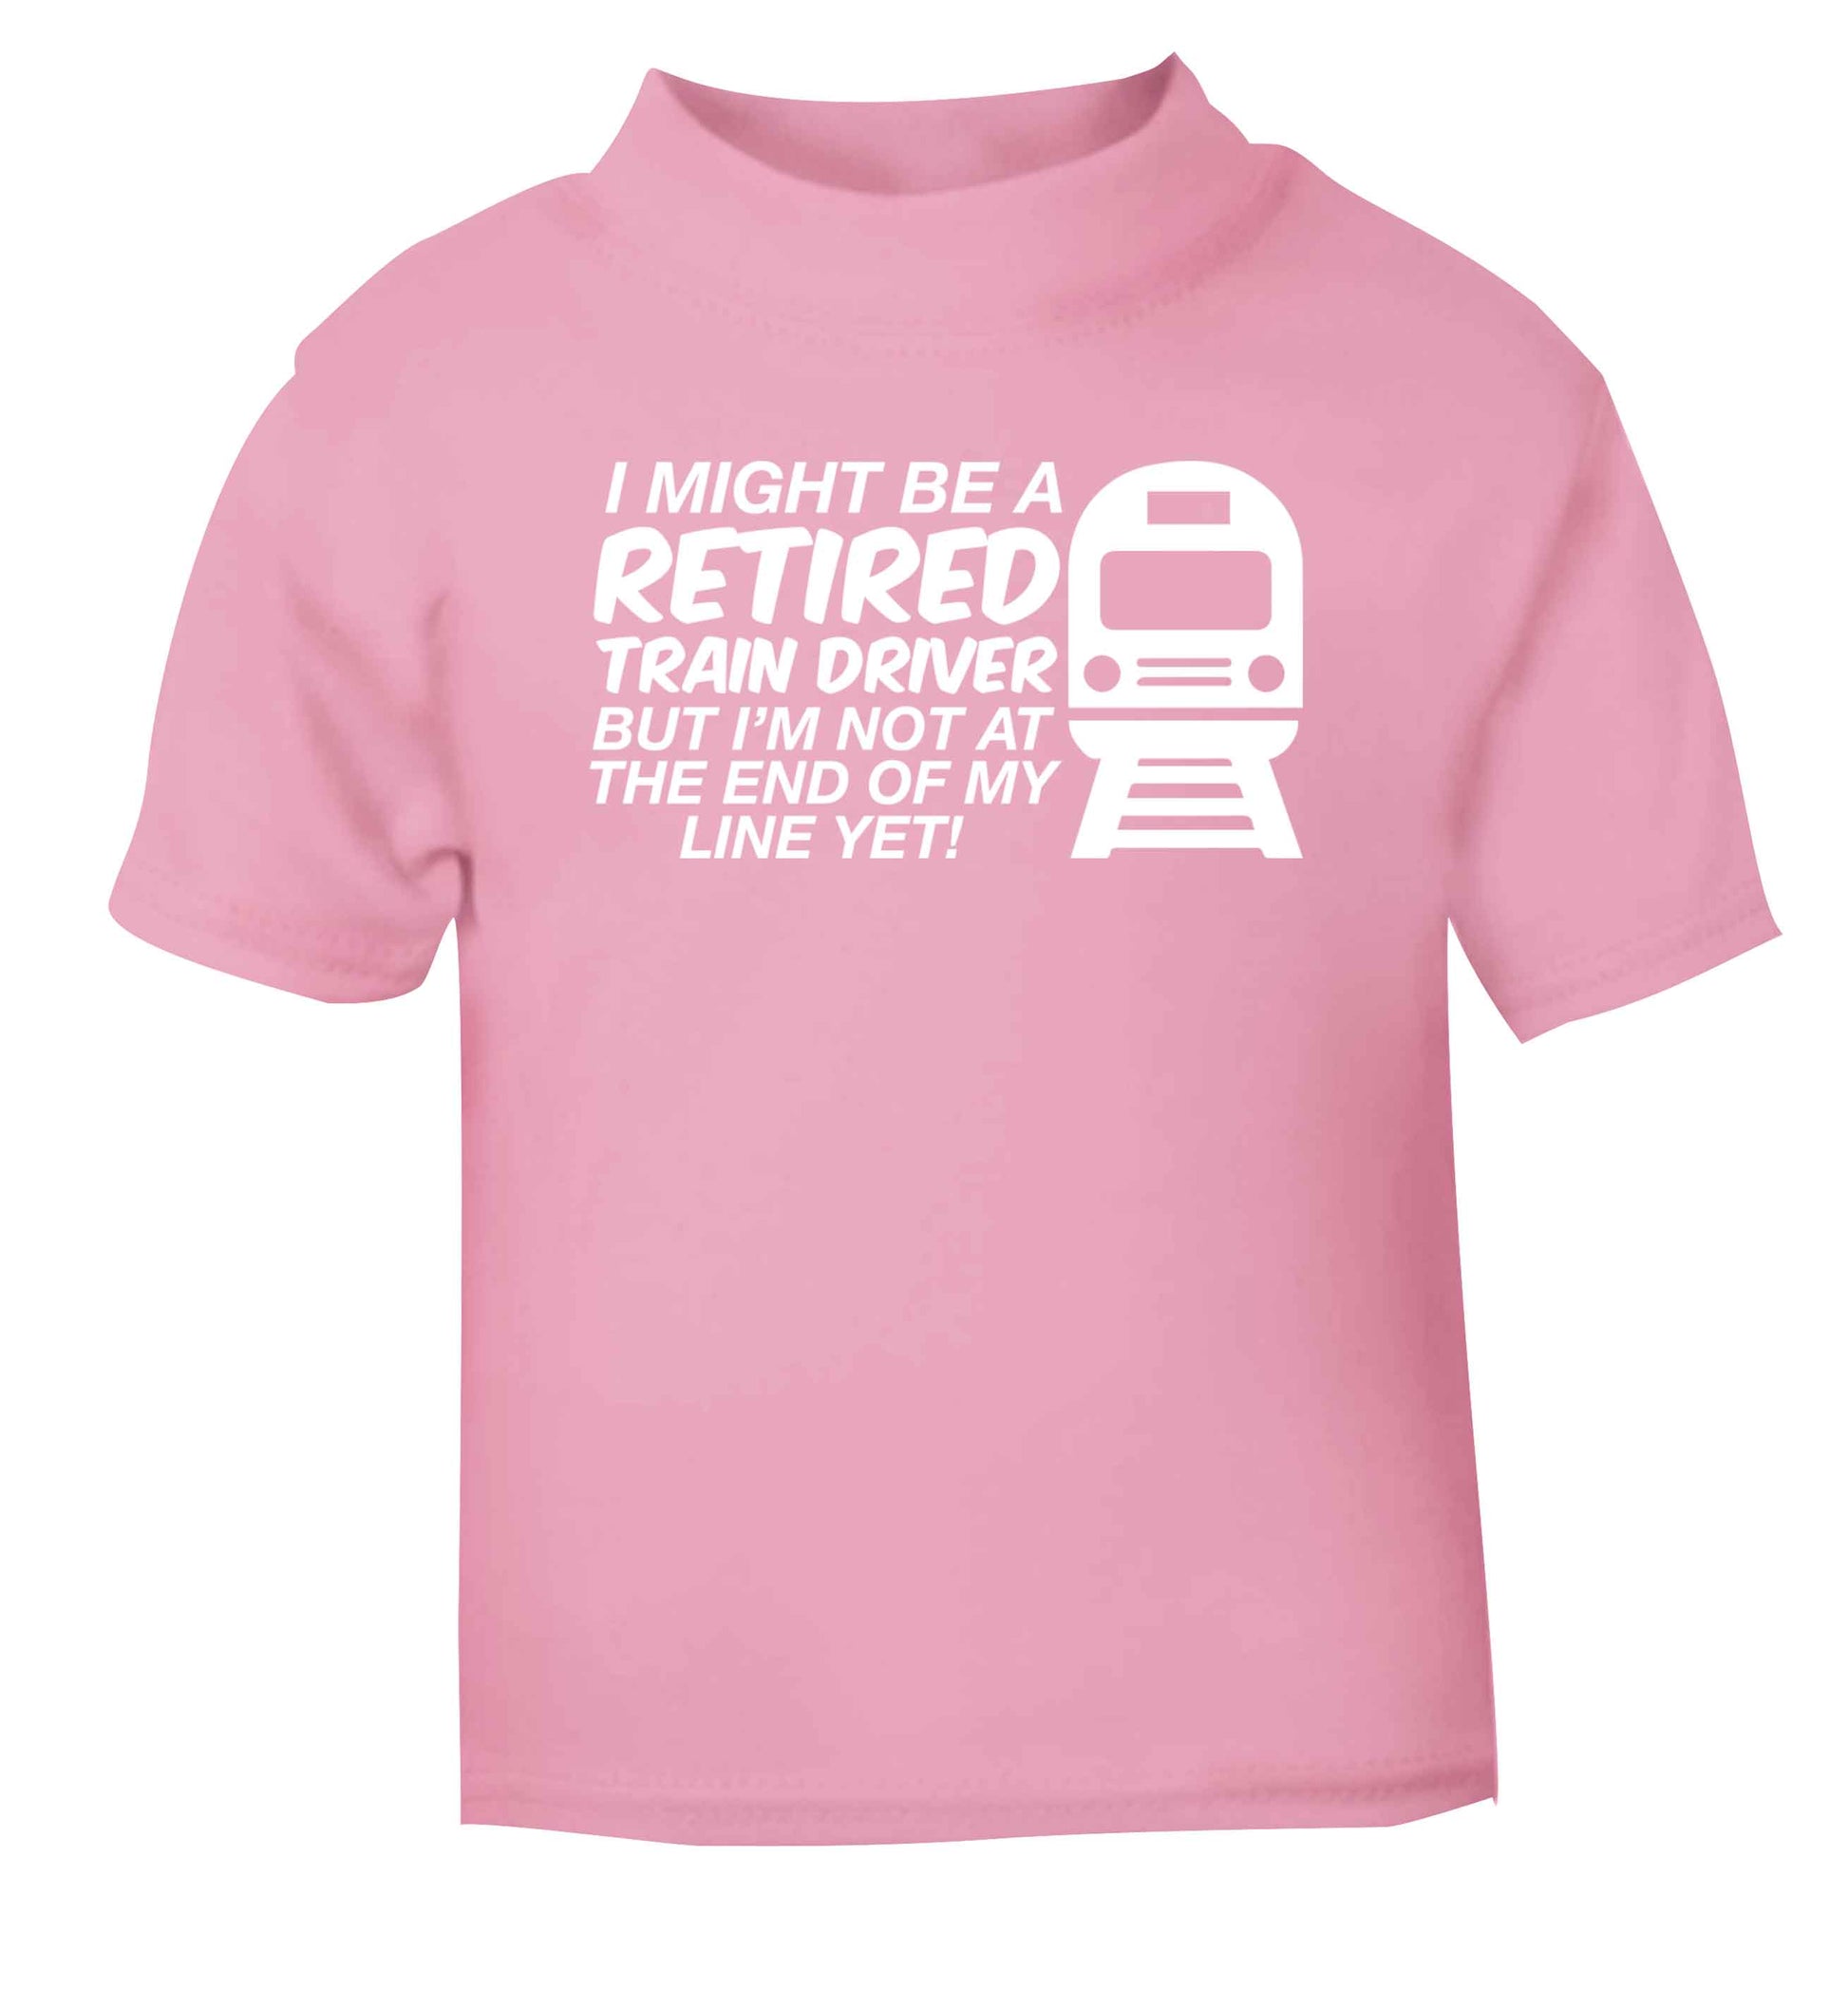 Retired train driver but I'm not at the end of my line yet light pink Baby Toddler Tshirt 2 Years